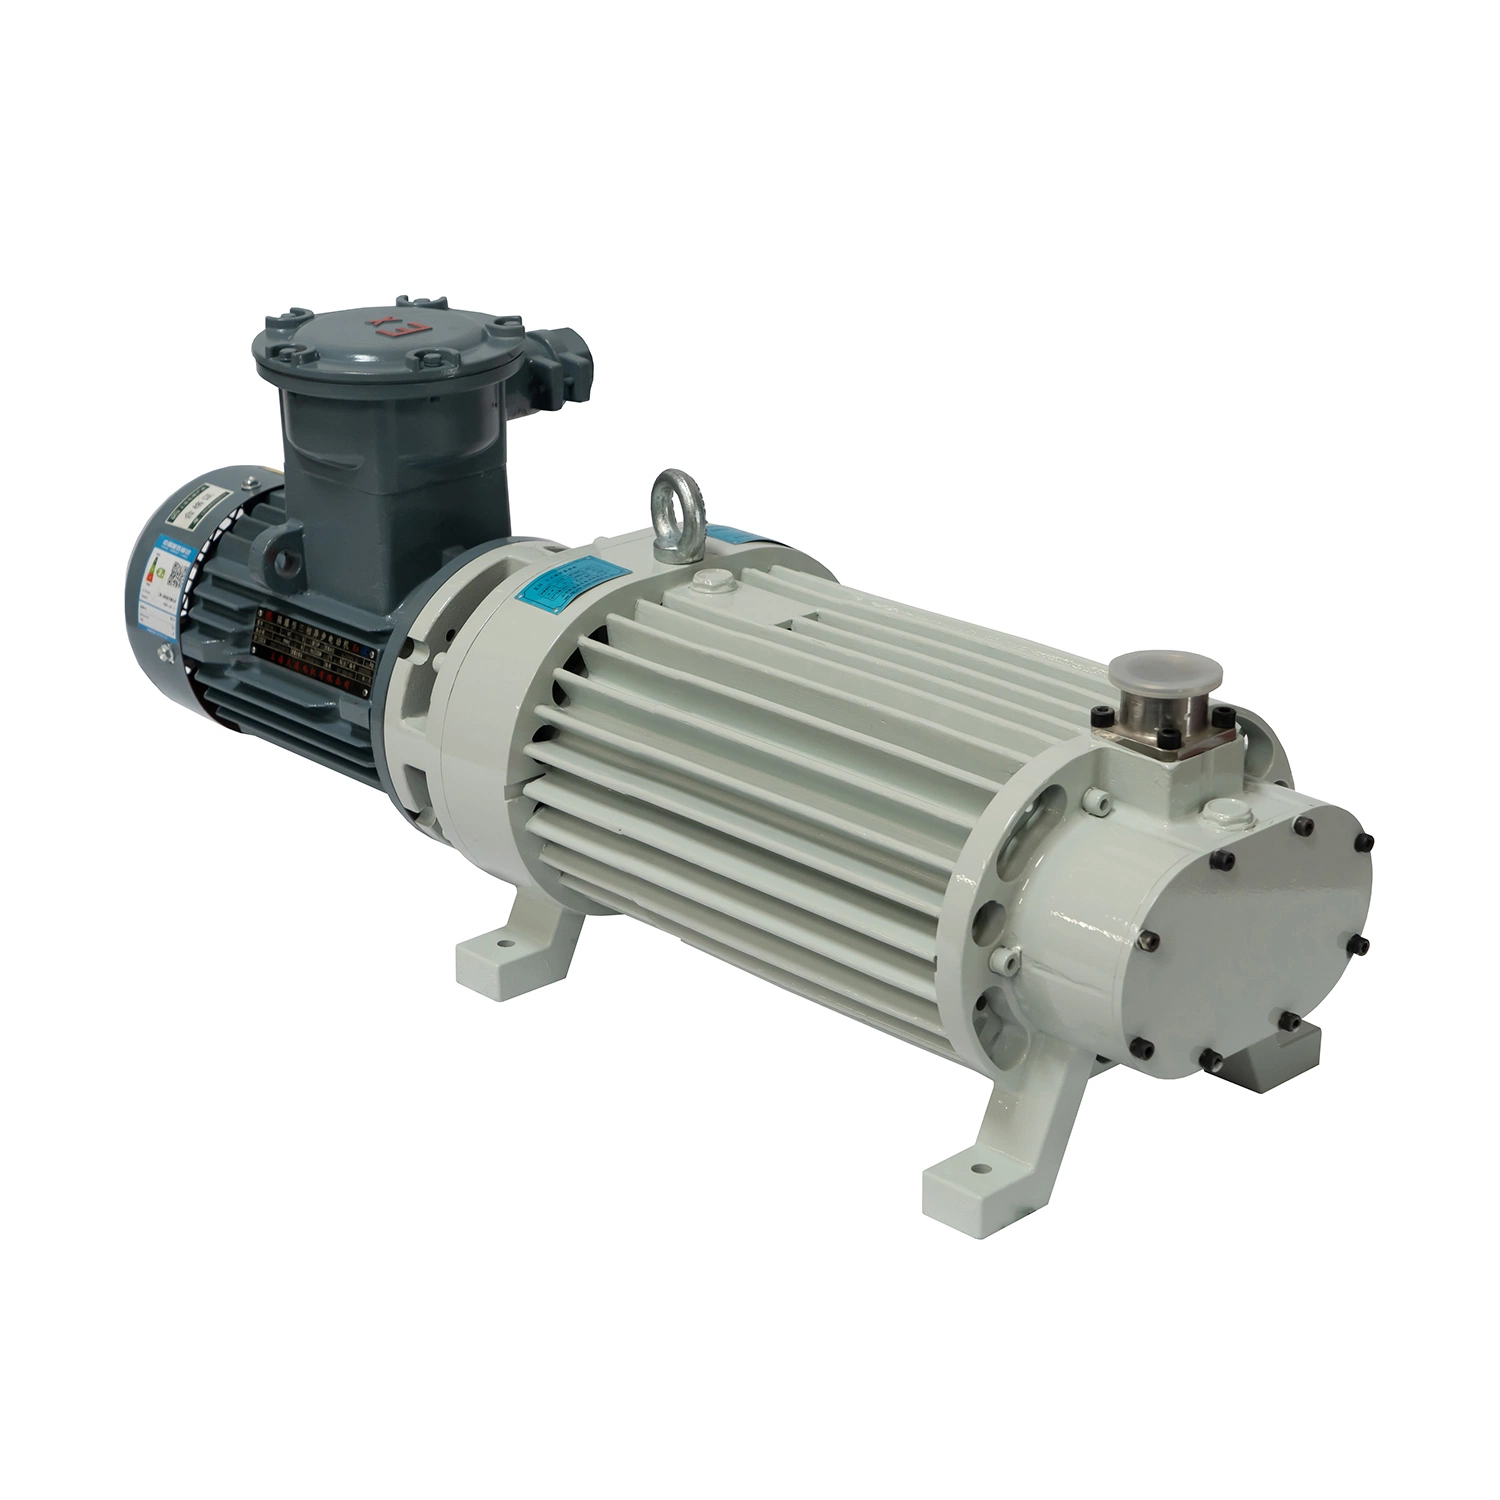 Air Cooled Screw Vacuum Pump, Pump Speed 10, Oil-Free Cleaning, Easy to Maintain